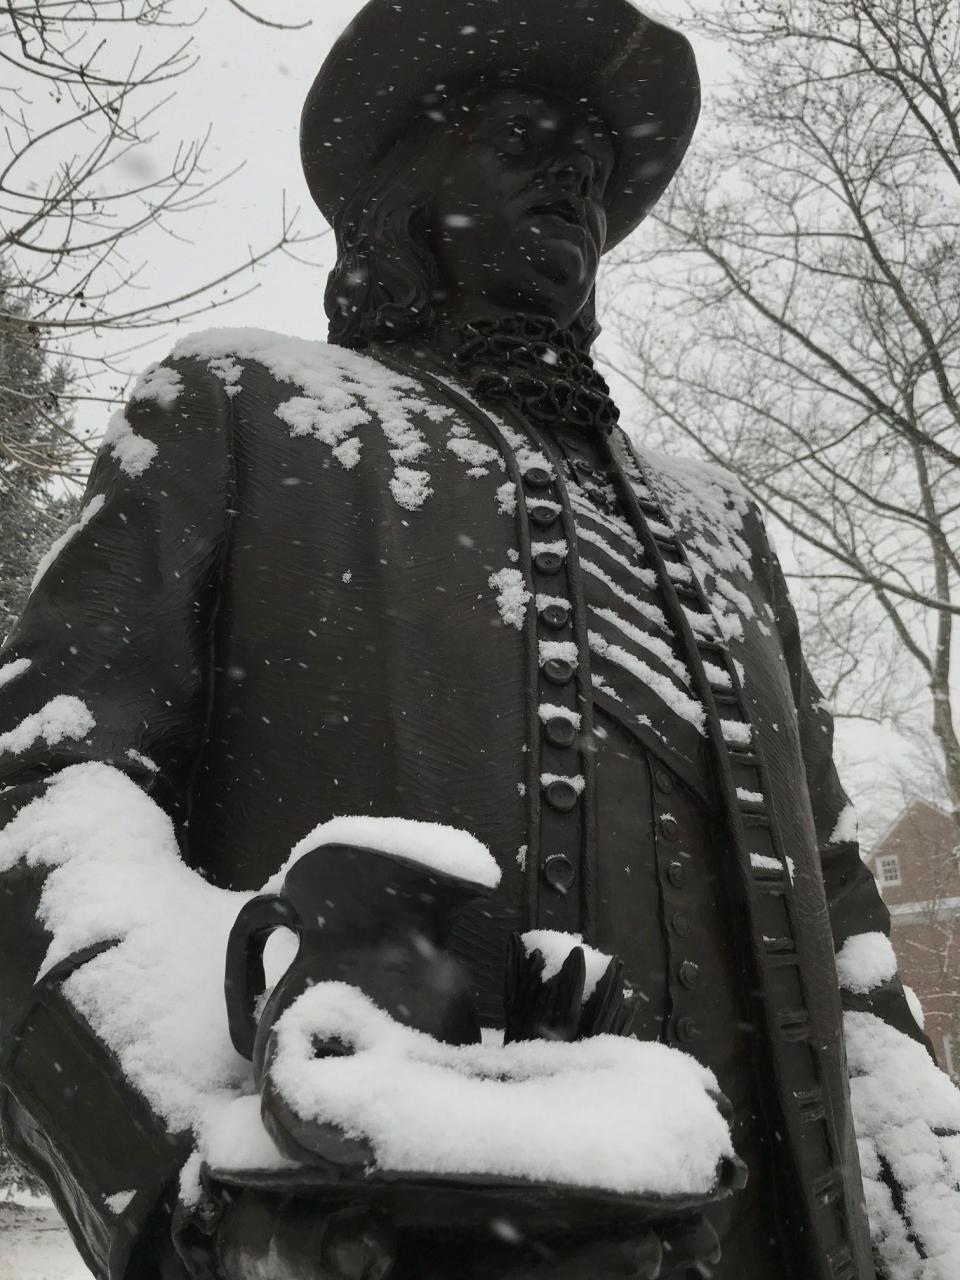 The statue of William Penn gets a light coating of snow on it Wednesday afternoon in Old New Castle.